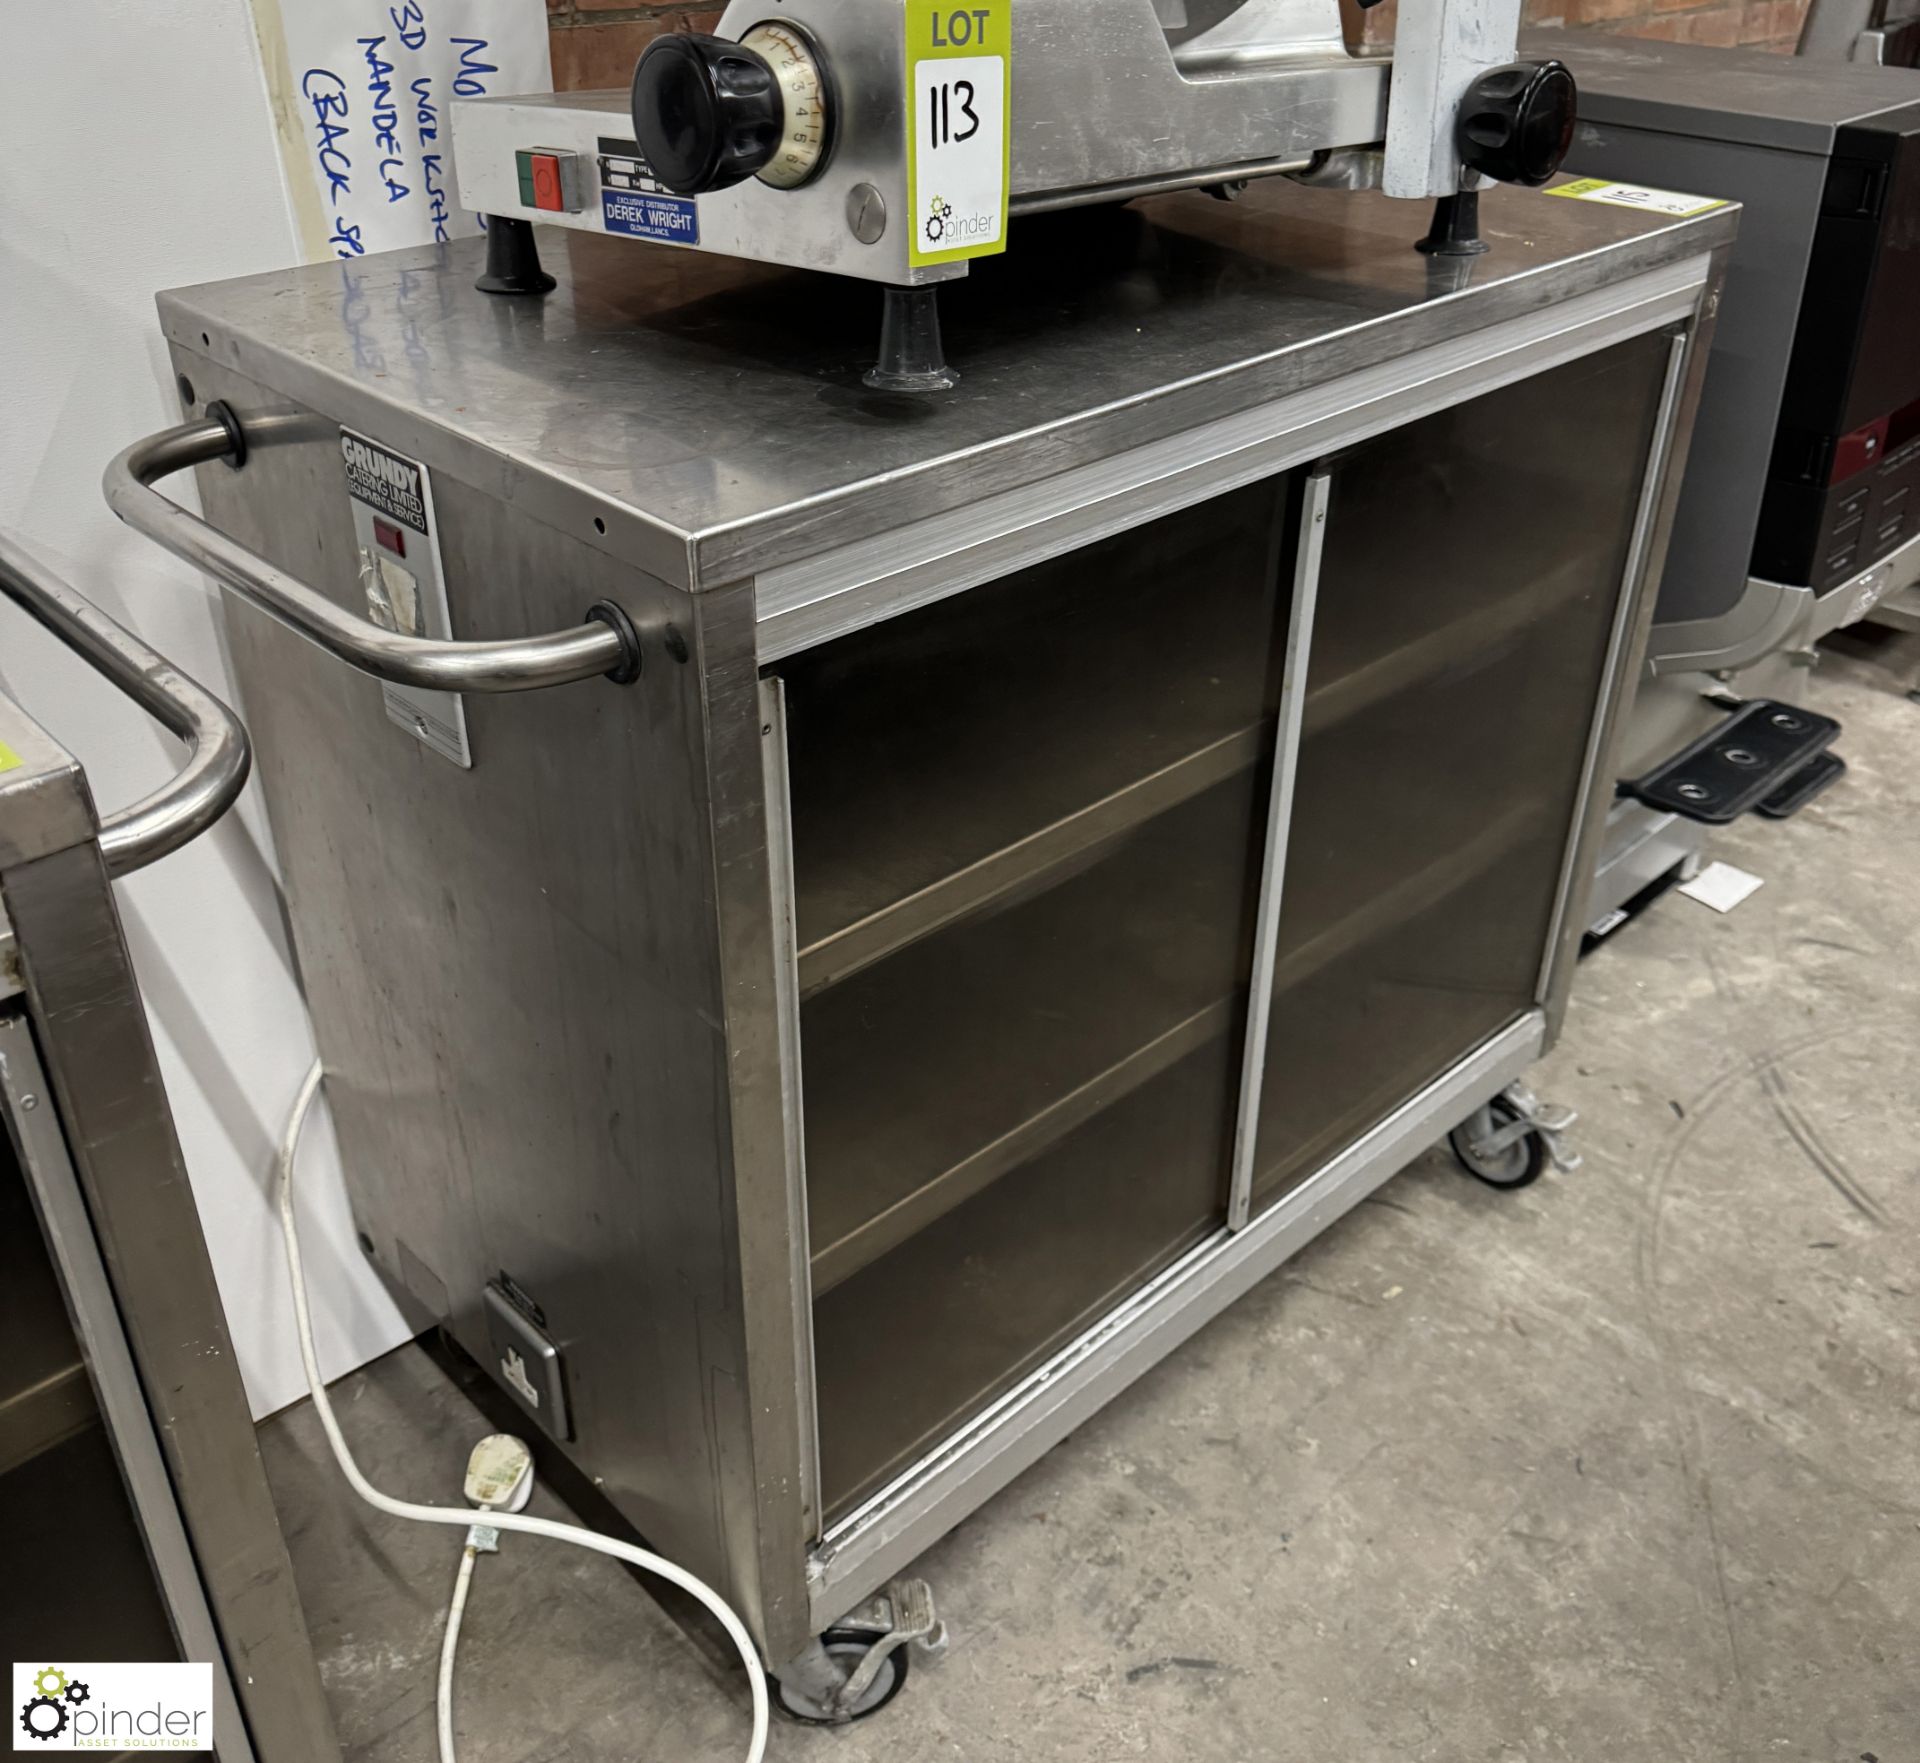 Grundy Maid stainless steel Heated Trolley, 240volts - Image 2 of 3